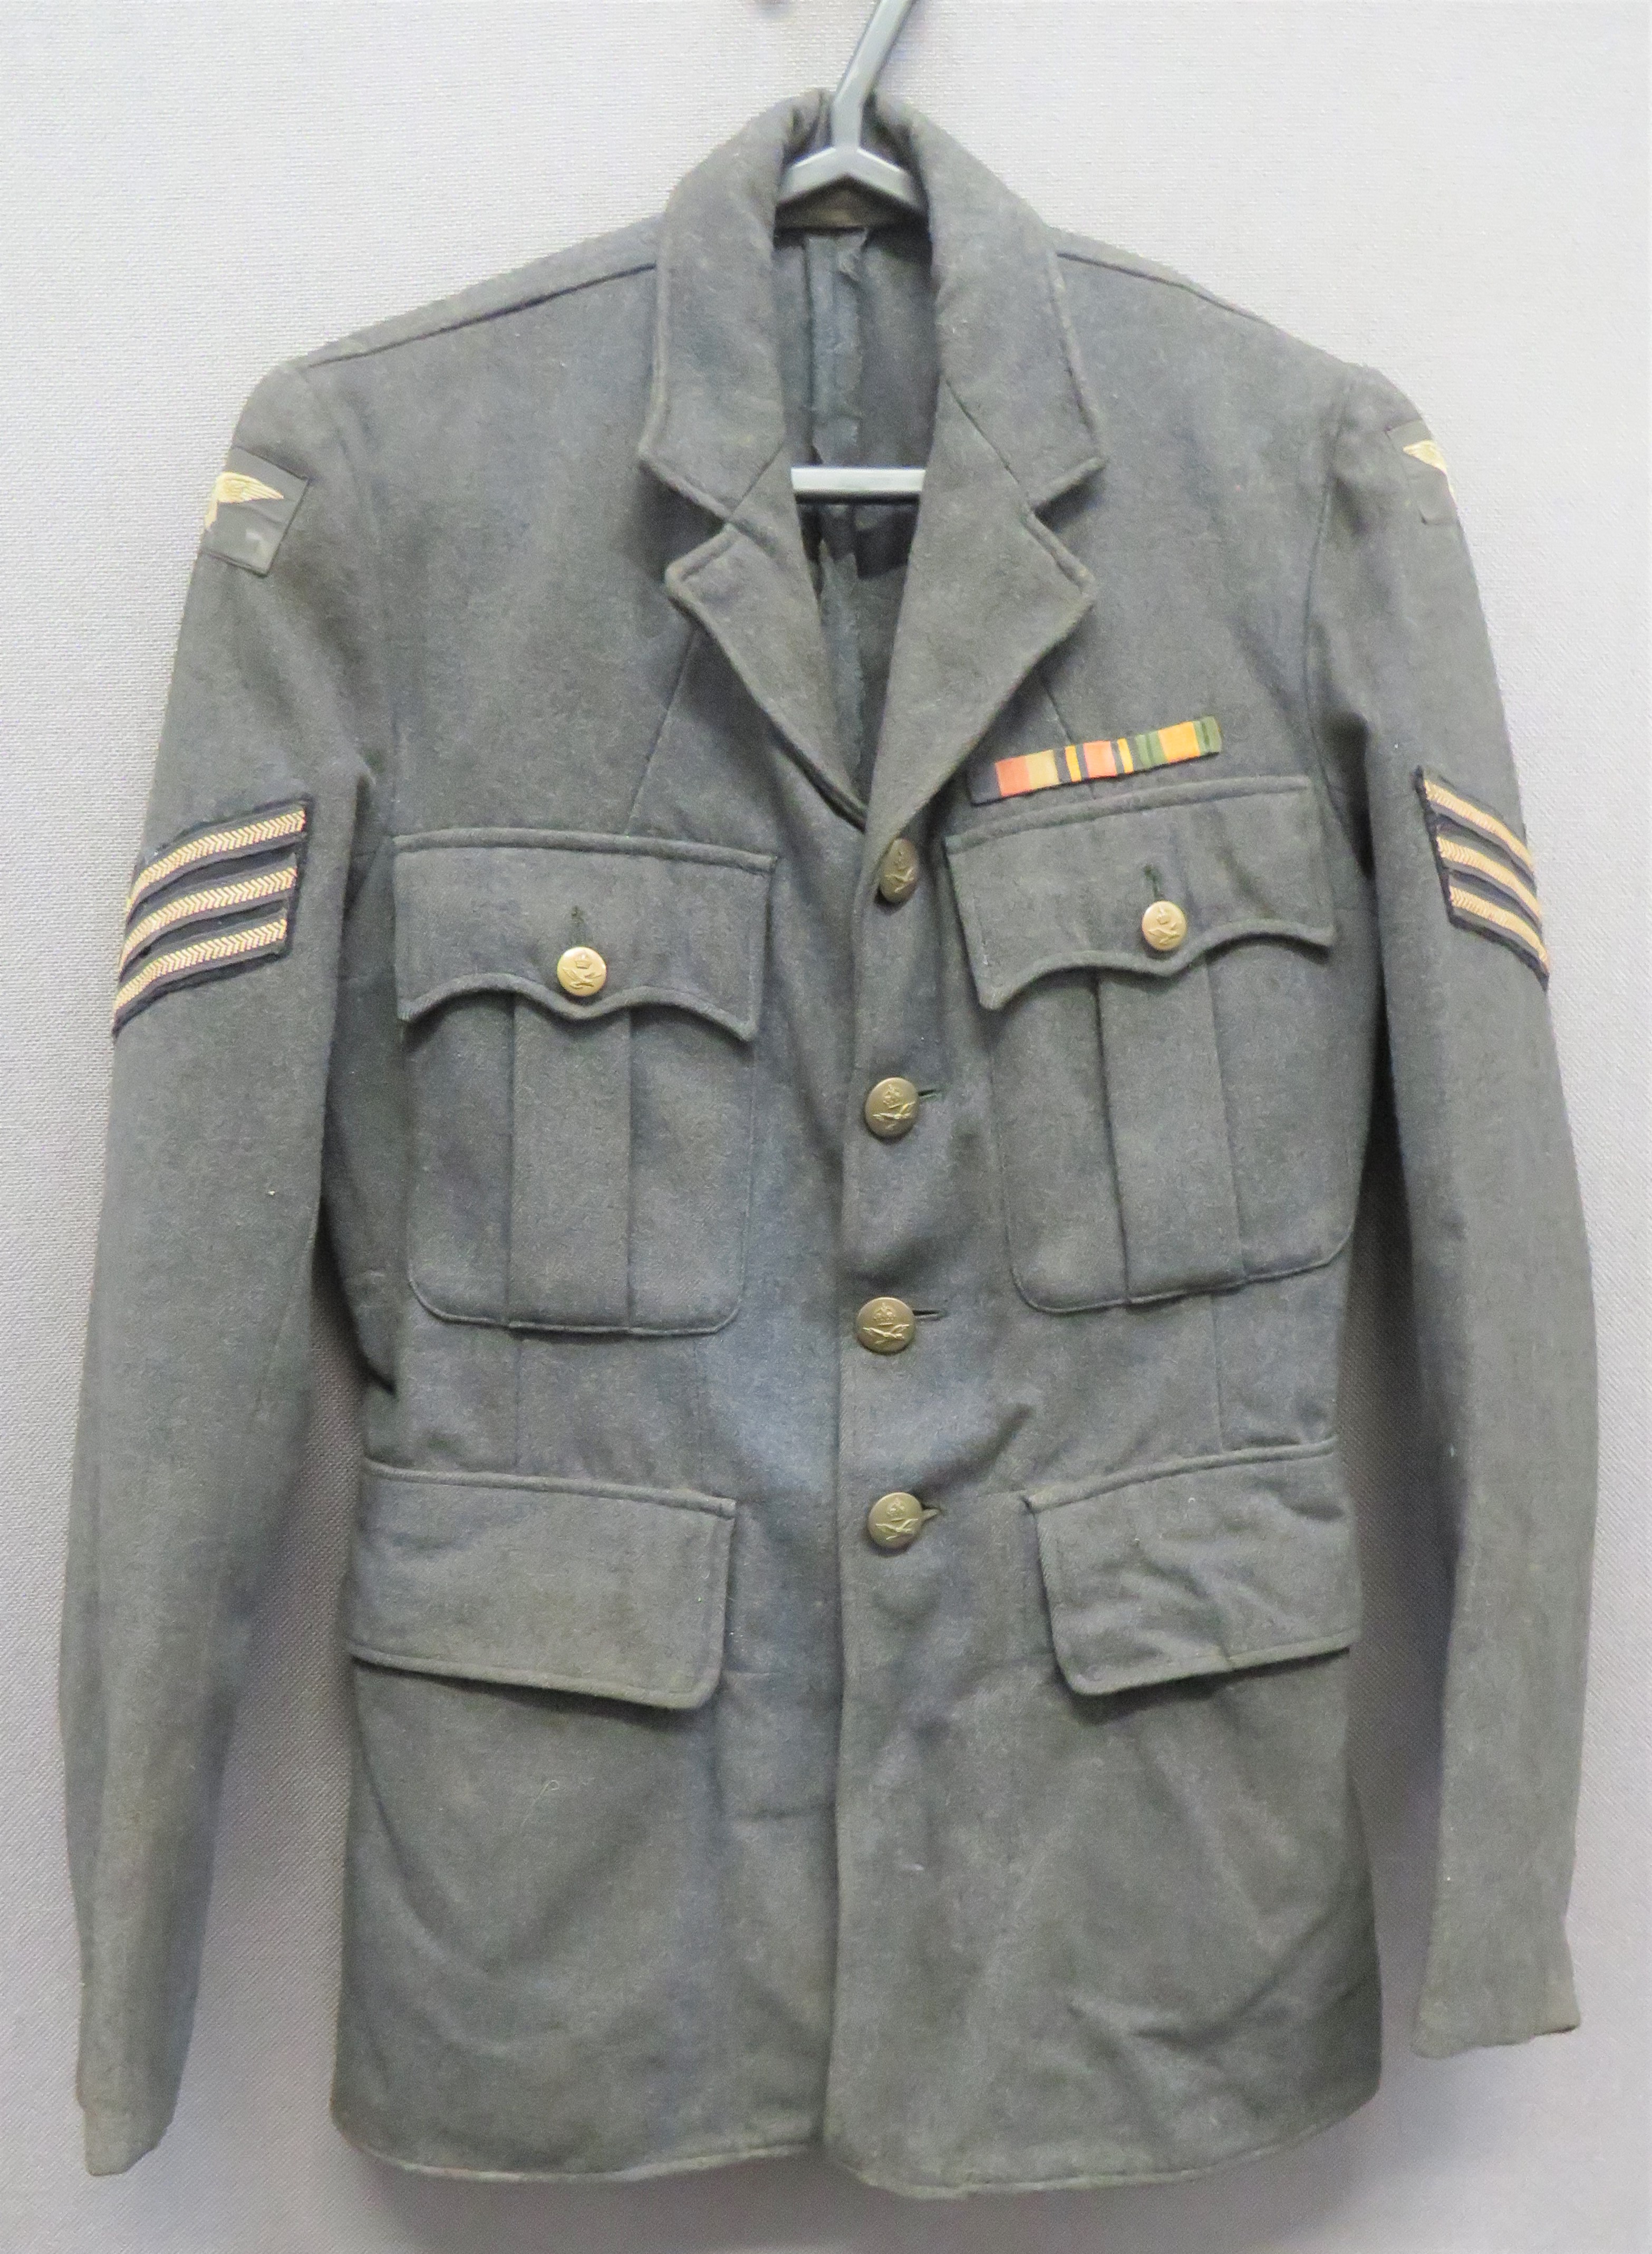 WW2 Royal Air Force Sergeant's Service Dress Tunic blue grey woollen, single breasted, open collar